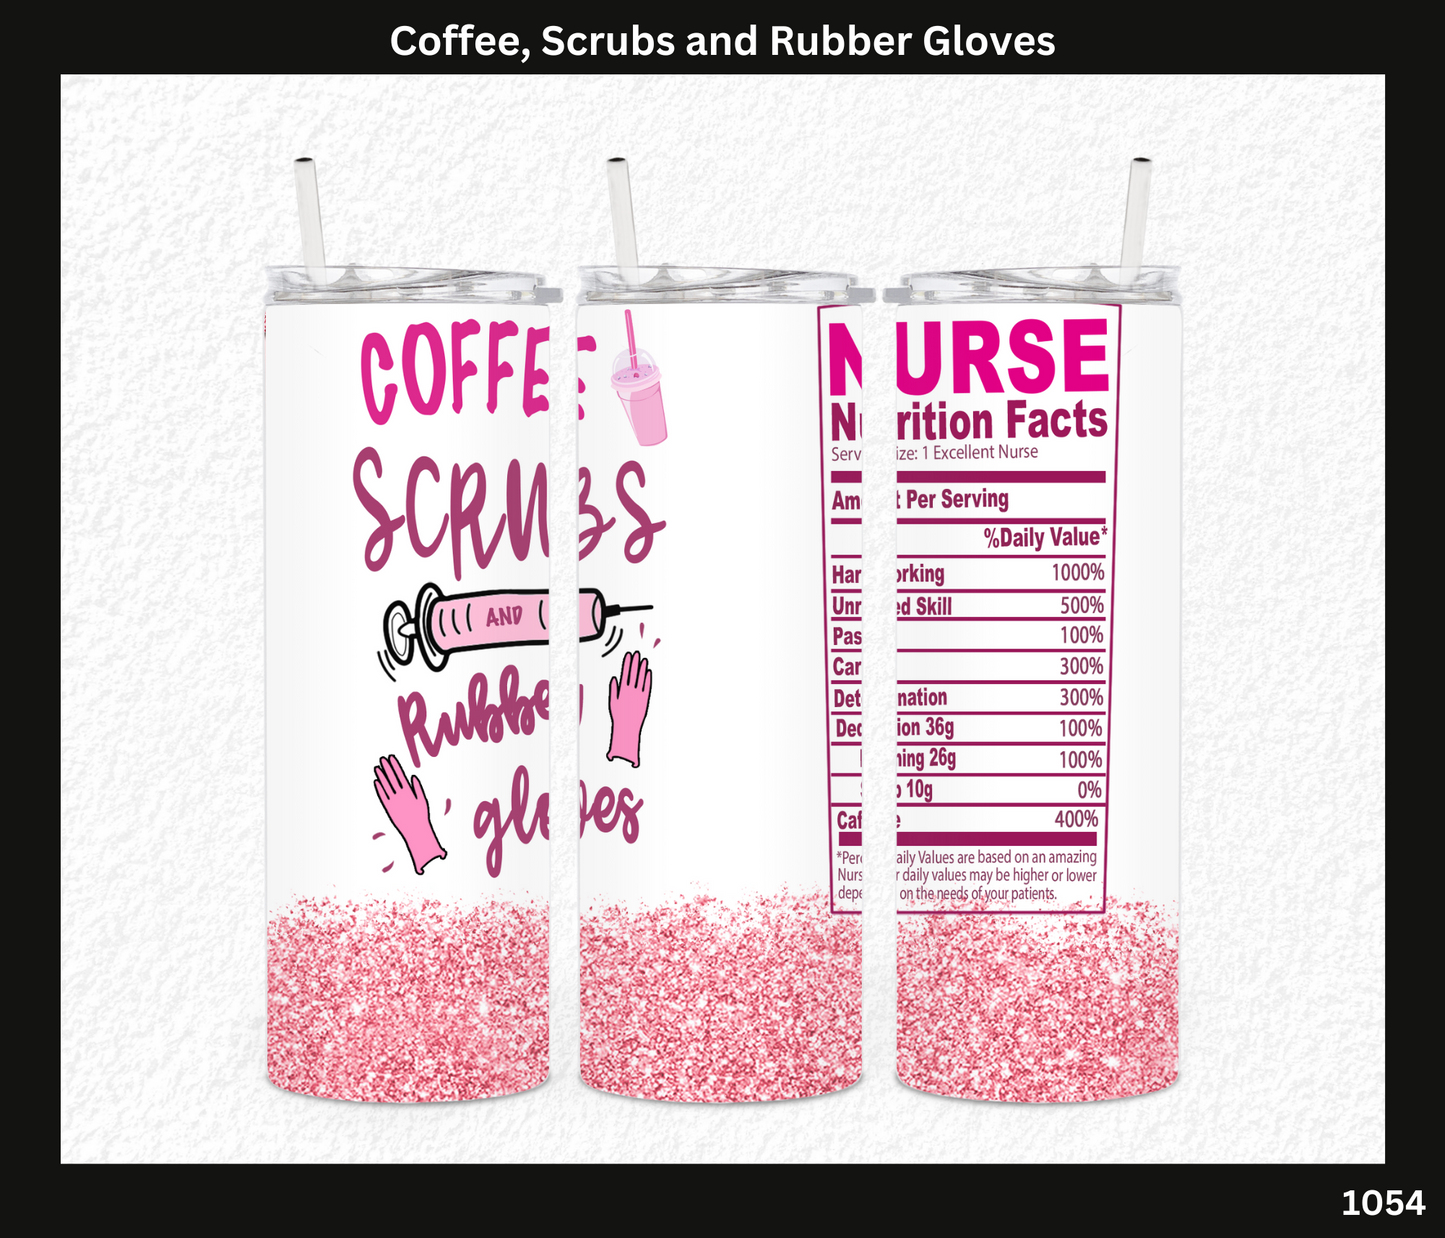 Coffee, Scrubs and Rubber Gloves